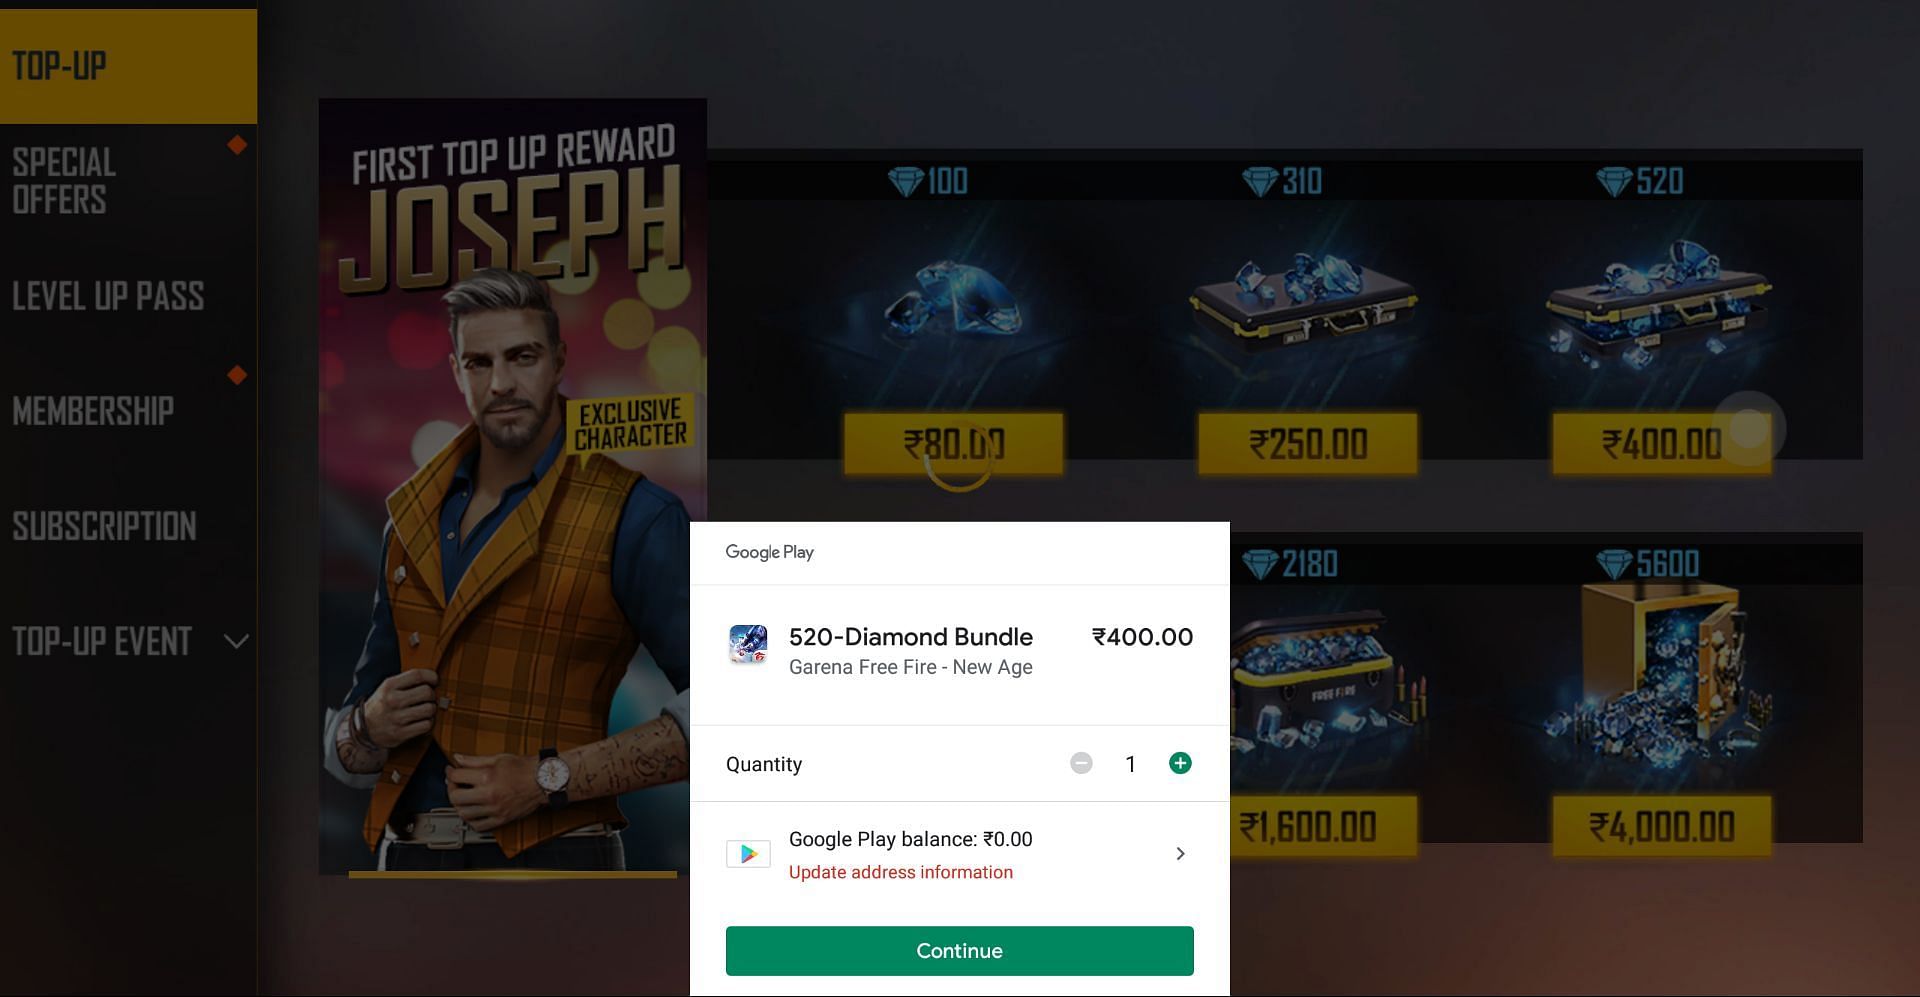 Make the payment to receive the rewards (Image via Free Fire)